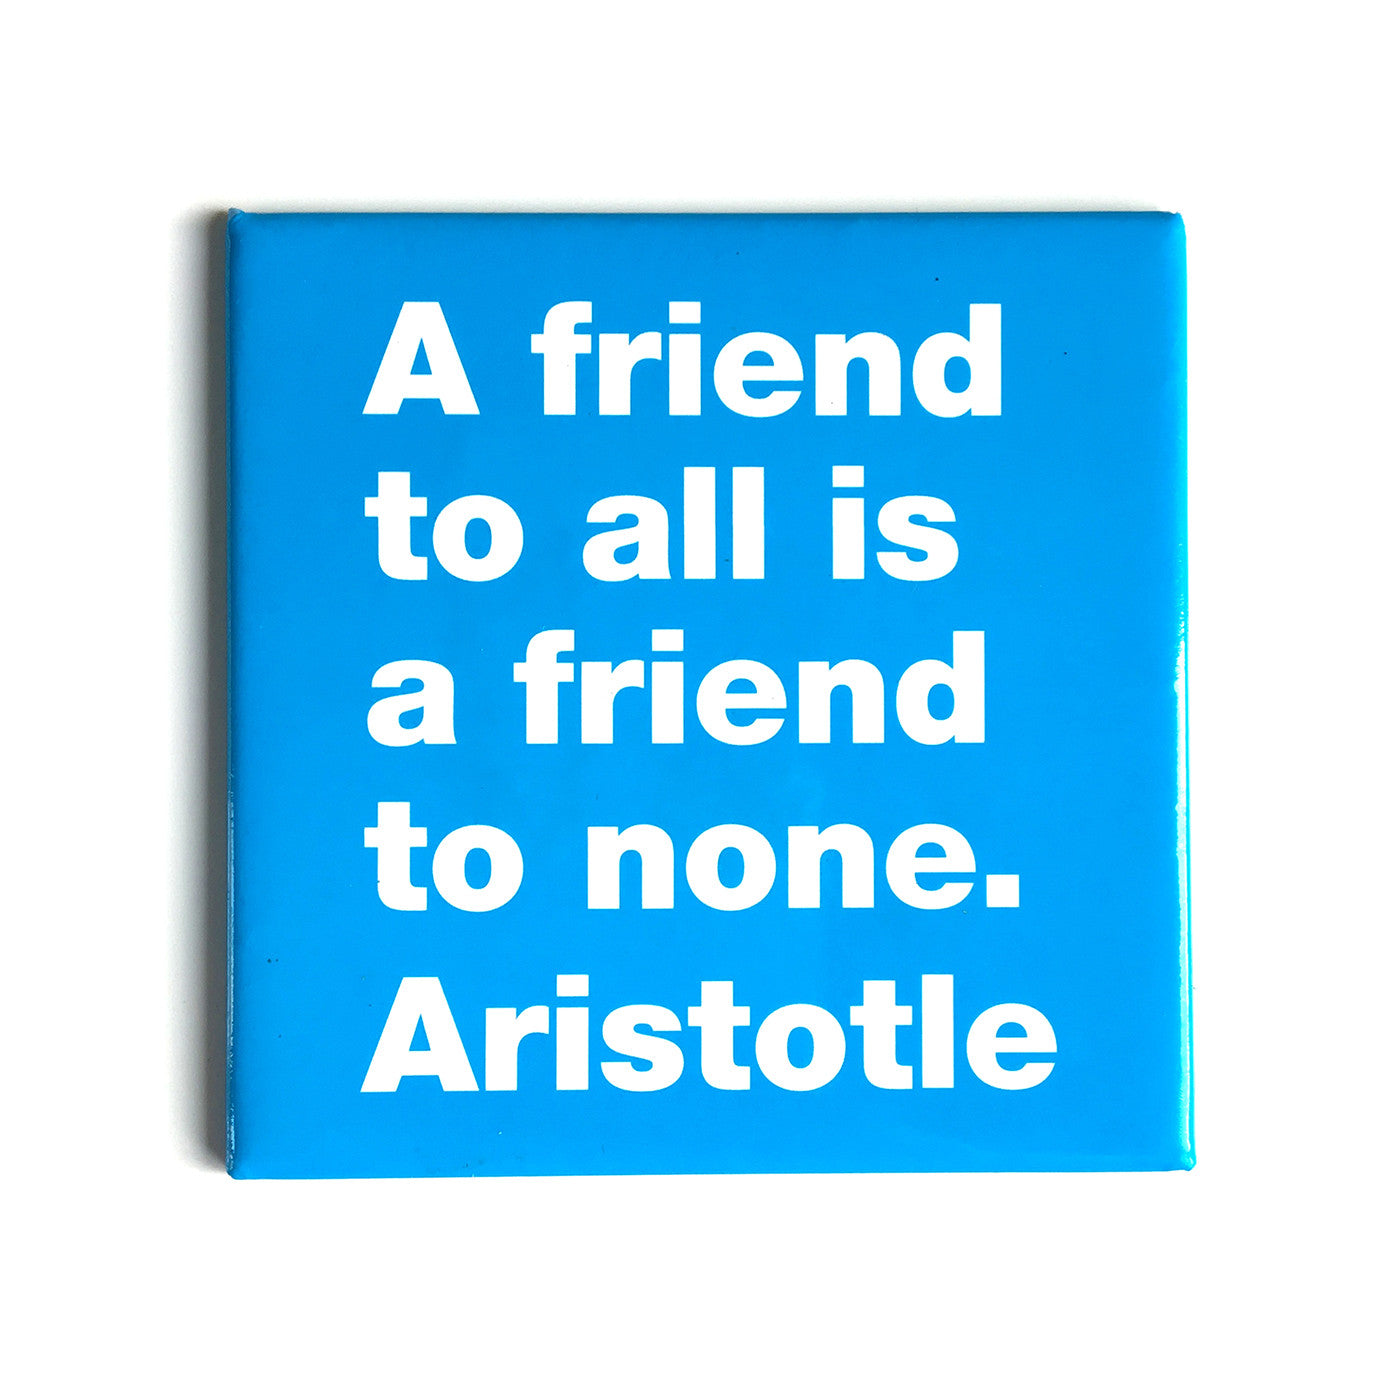 A friend to all -Aristotle magnet